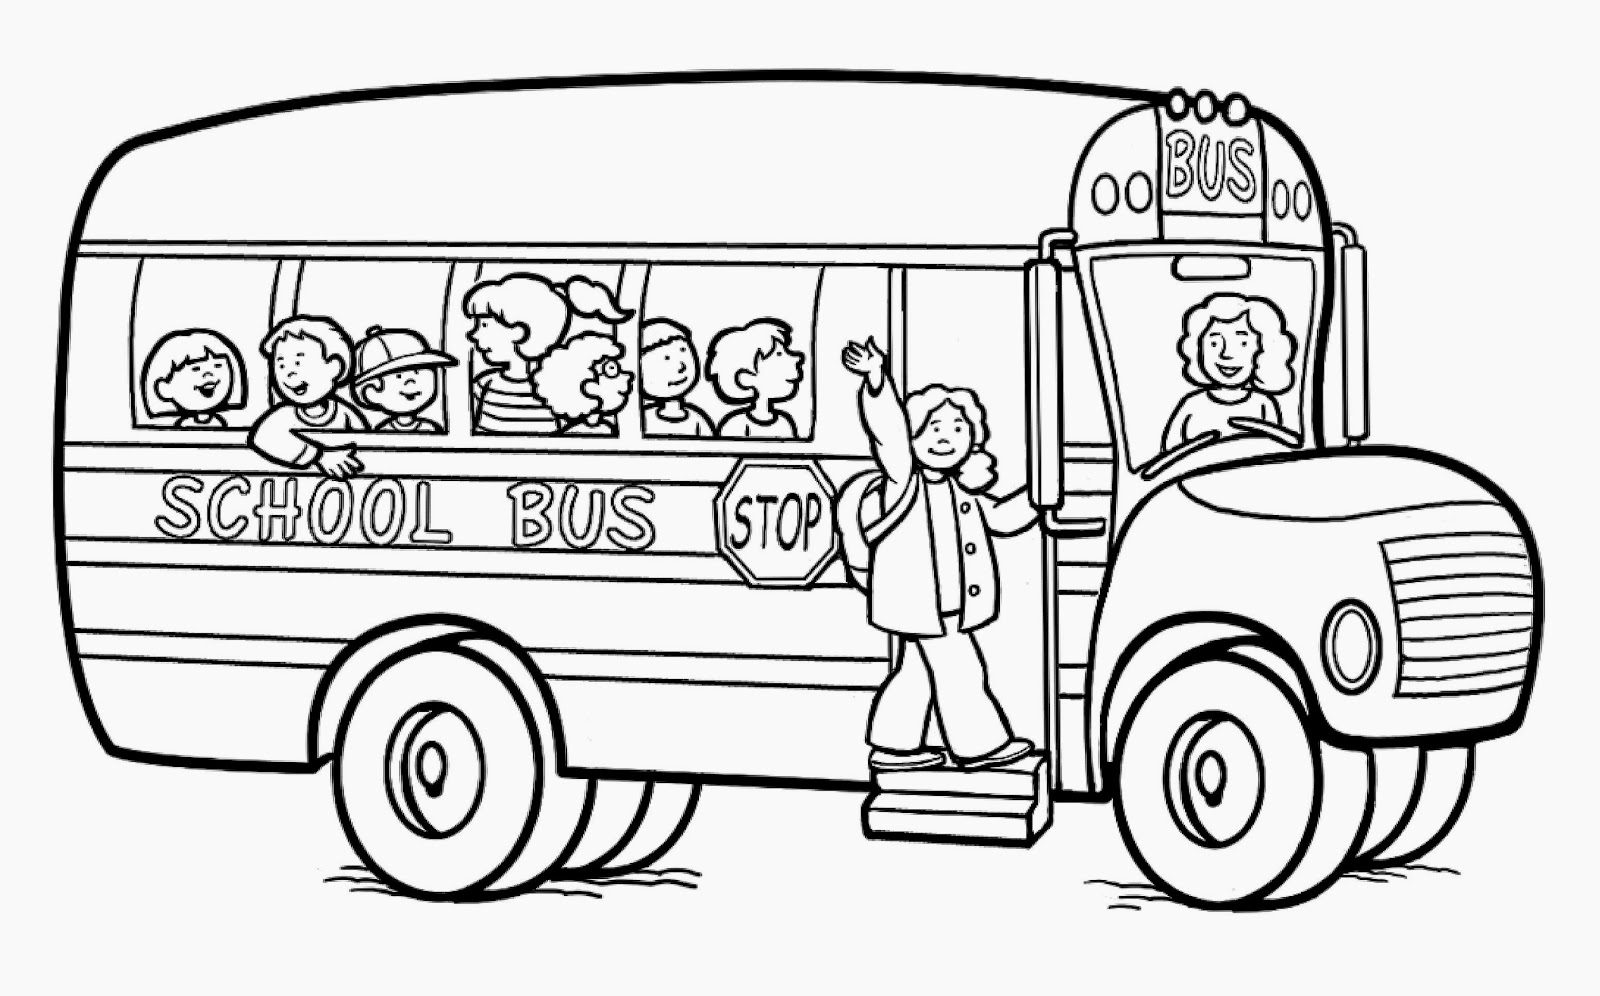 Download Transportation For Kids Coloring Pages: Bus The Car ...